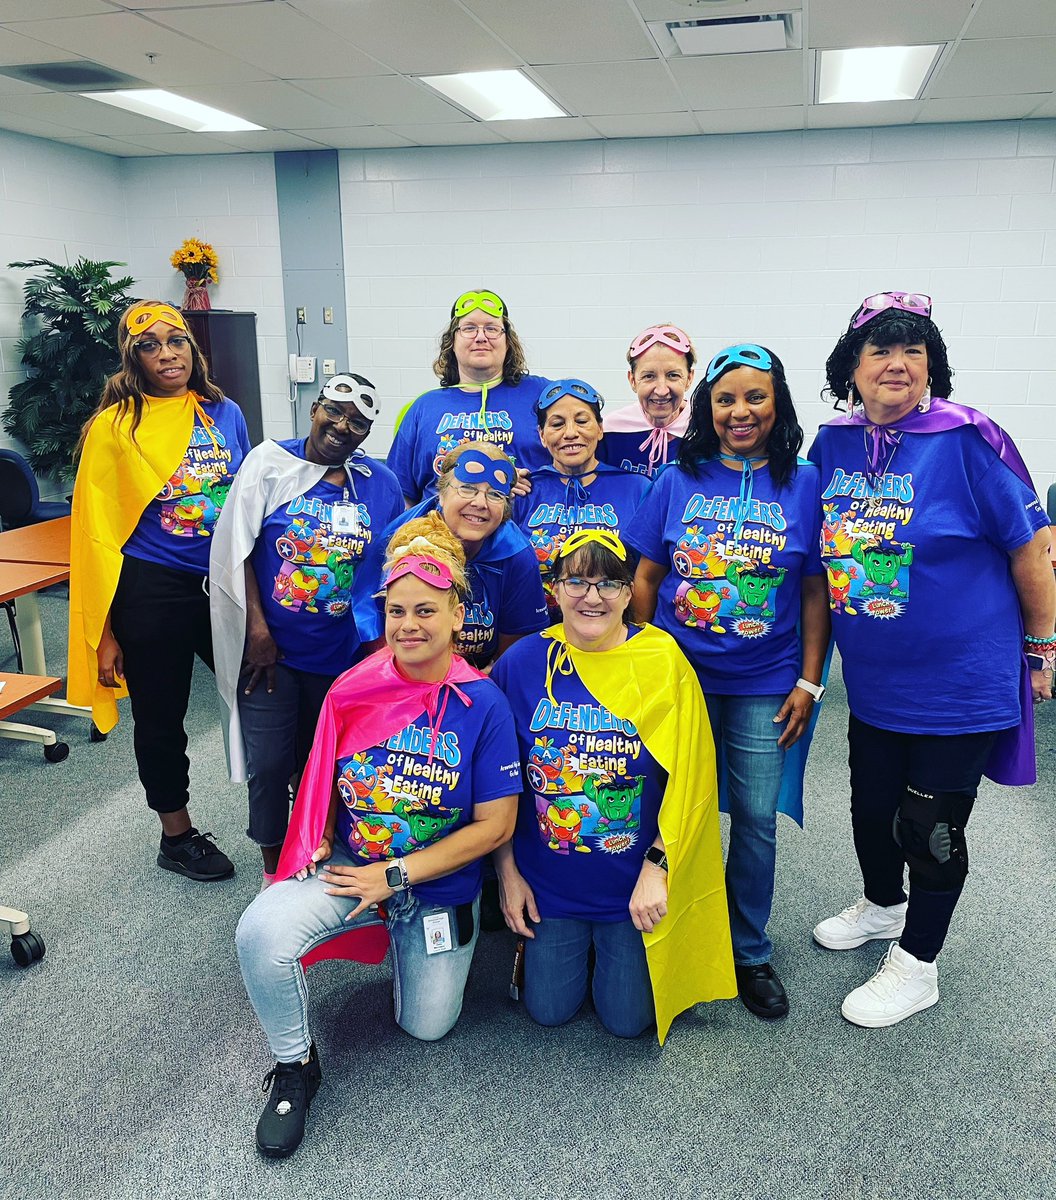 We have the TRUE Super Heroes of our school…our Student Nutrition Team! We appreciate you!!!